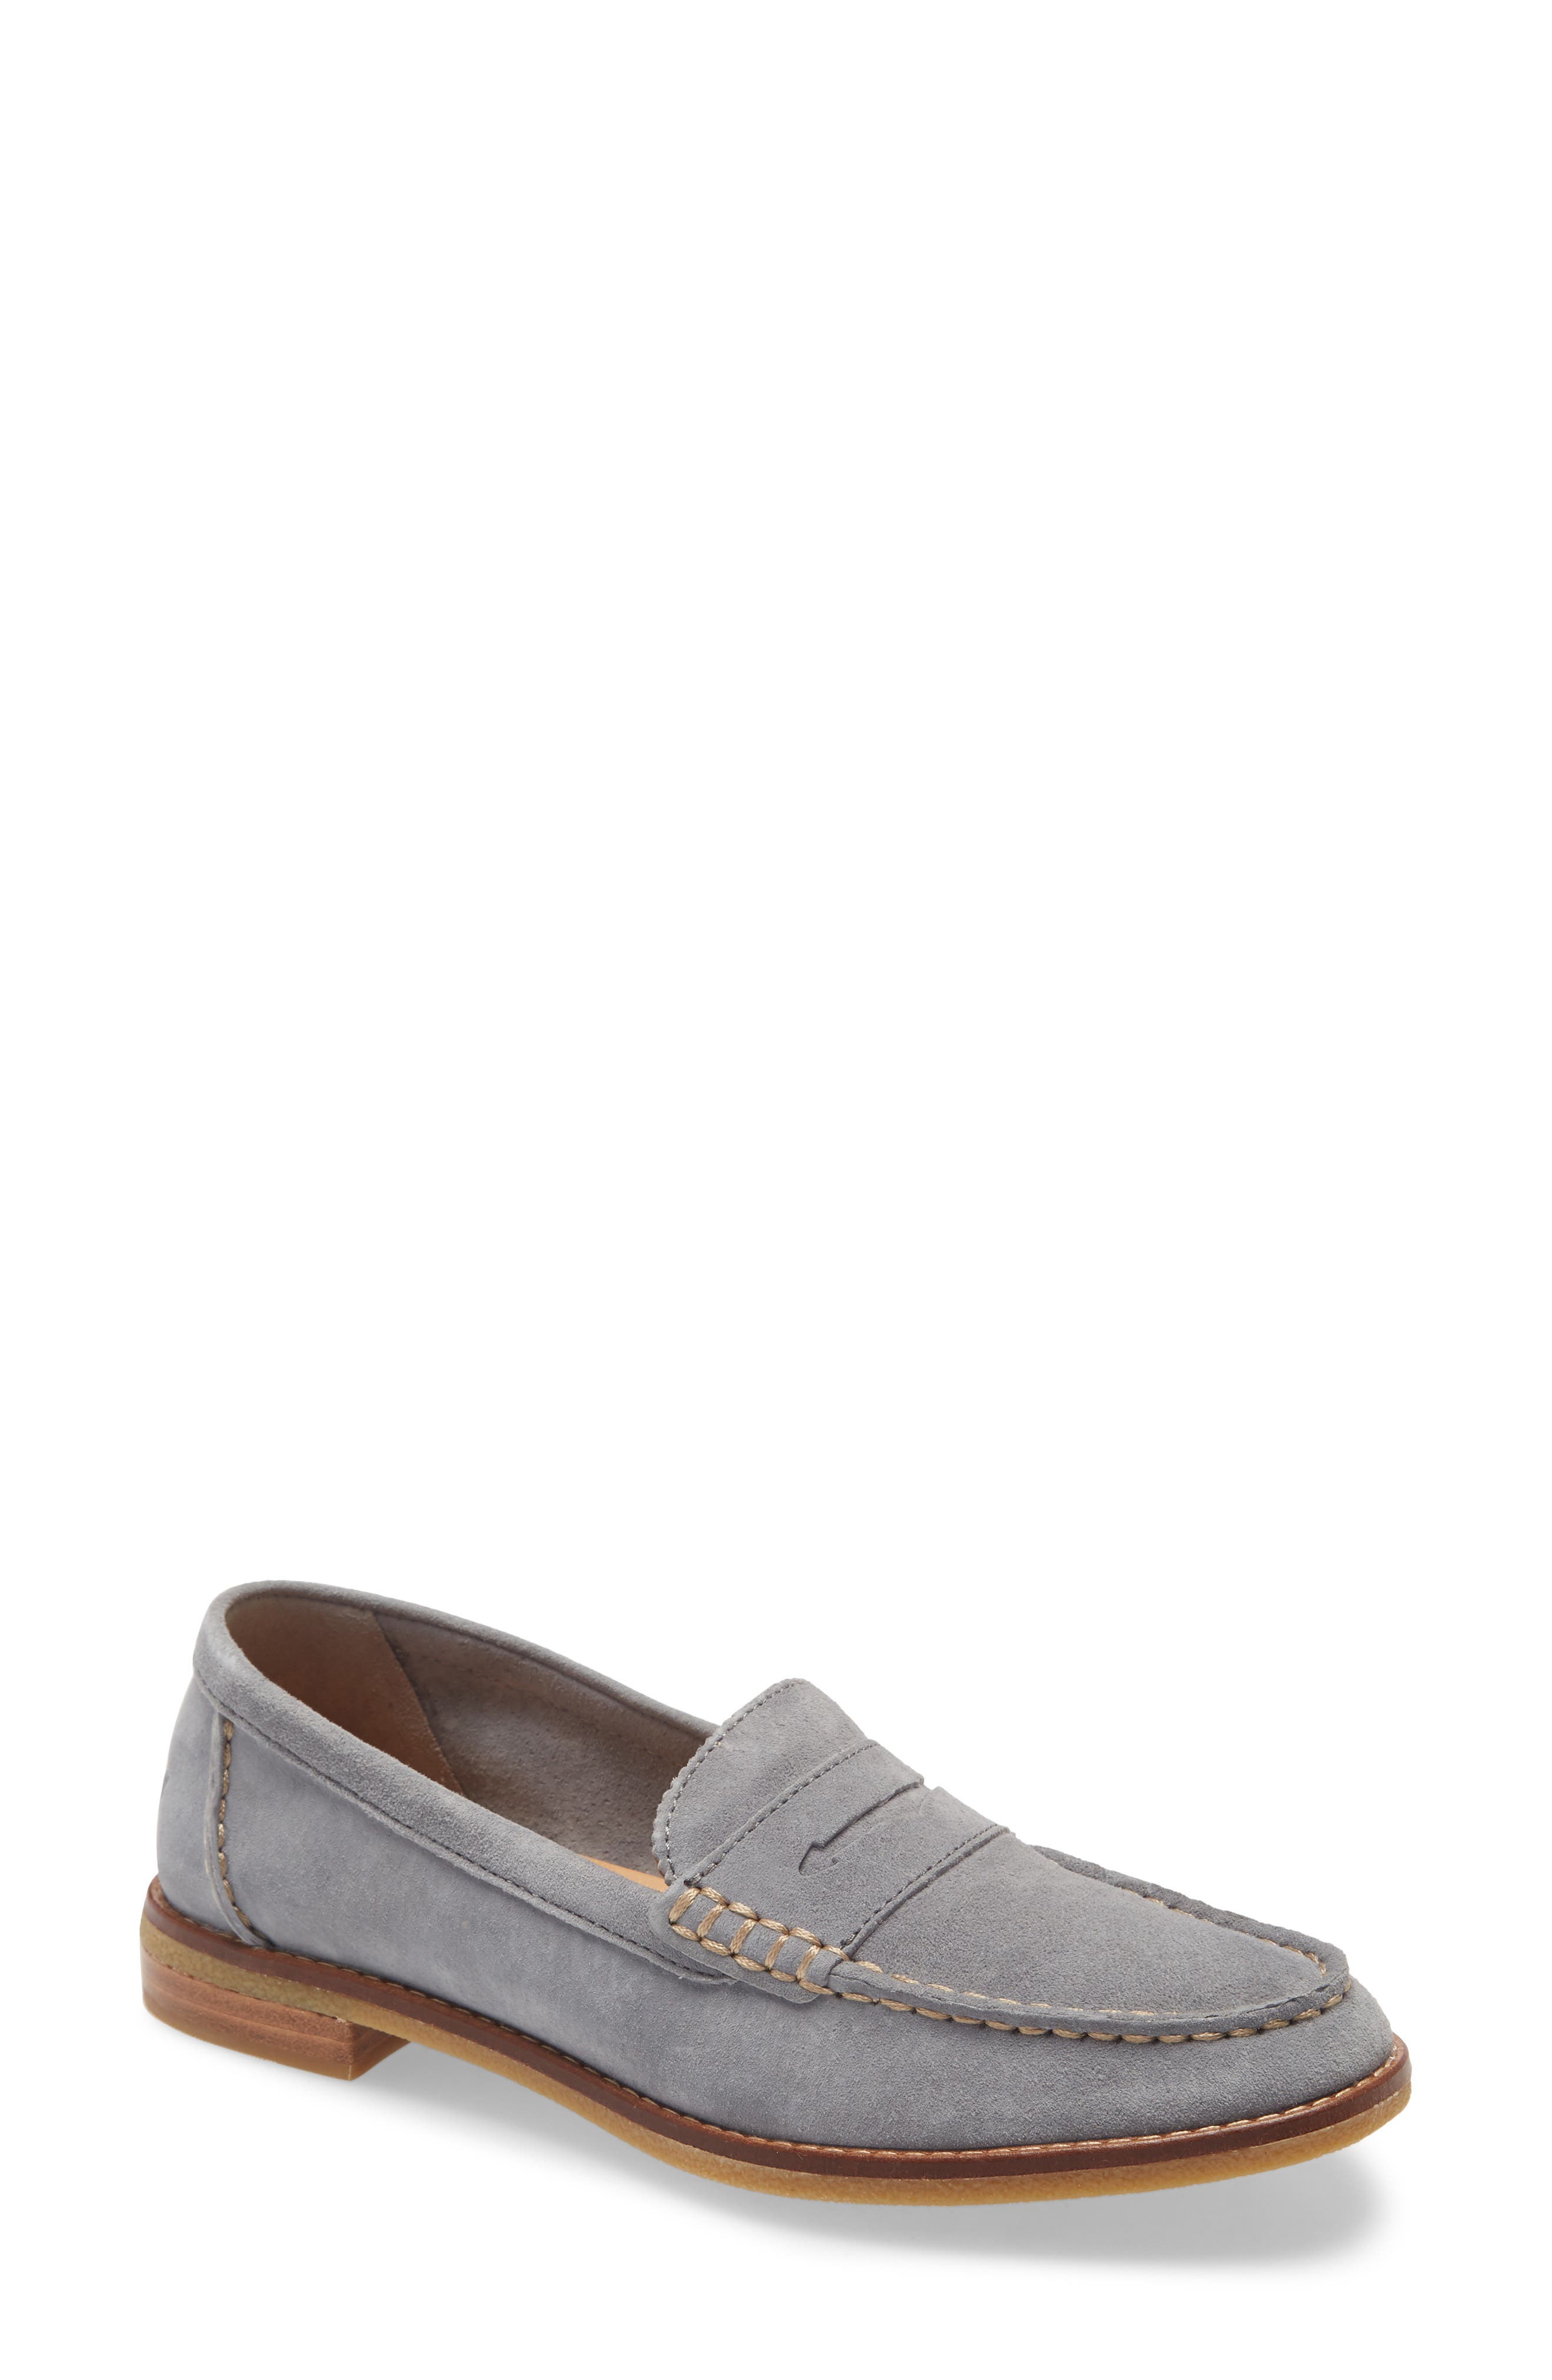 seaport penny loafer sperry